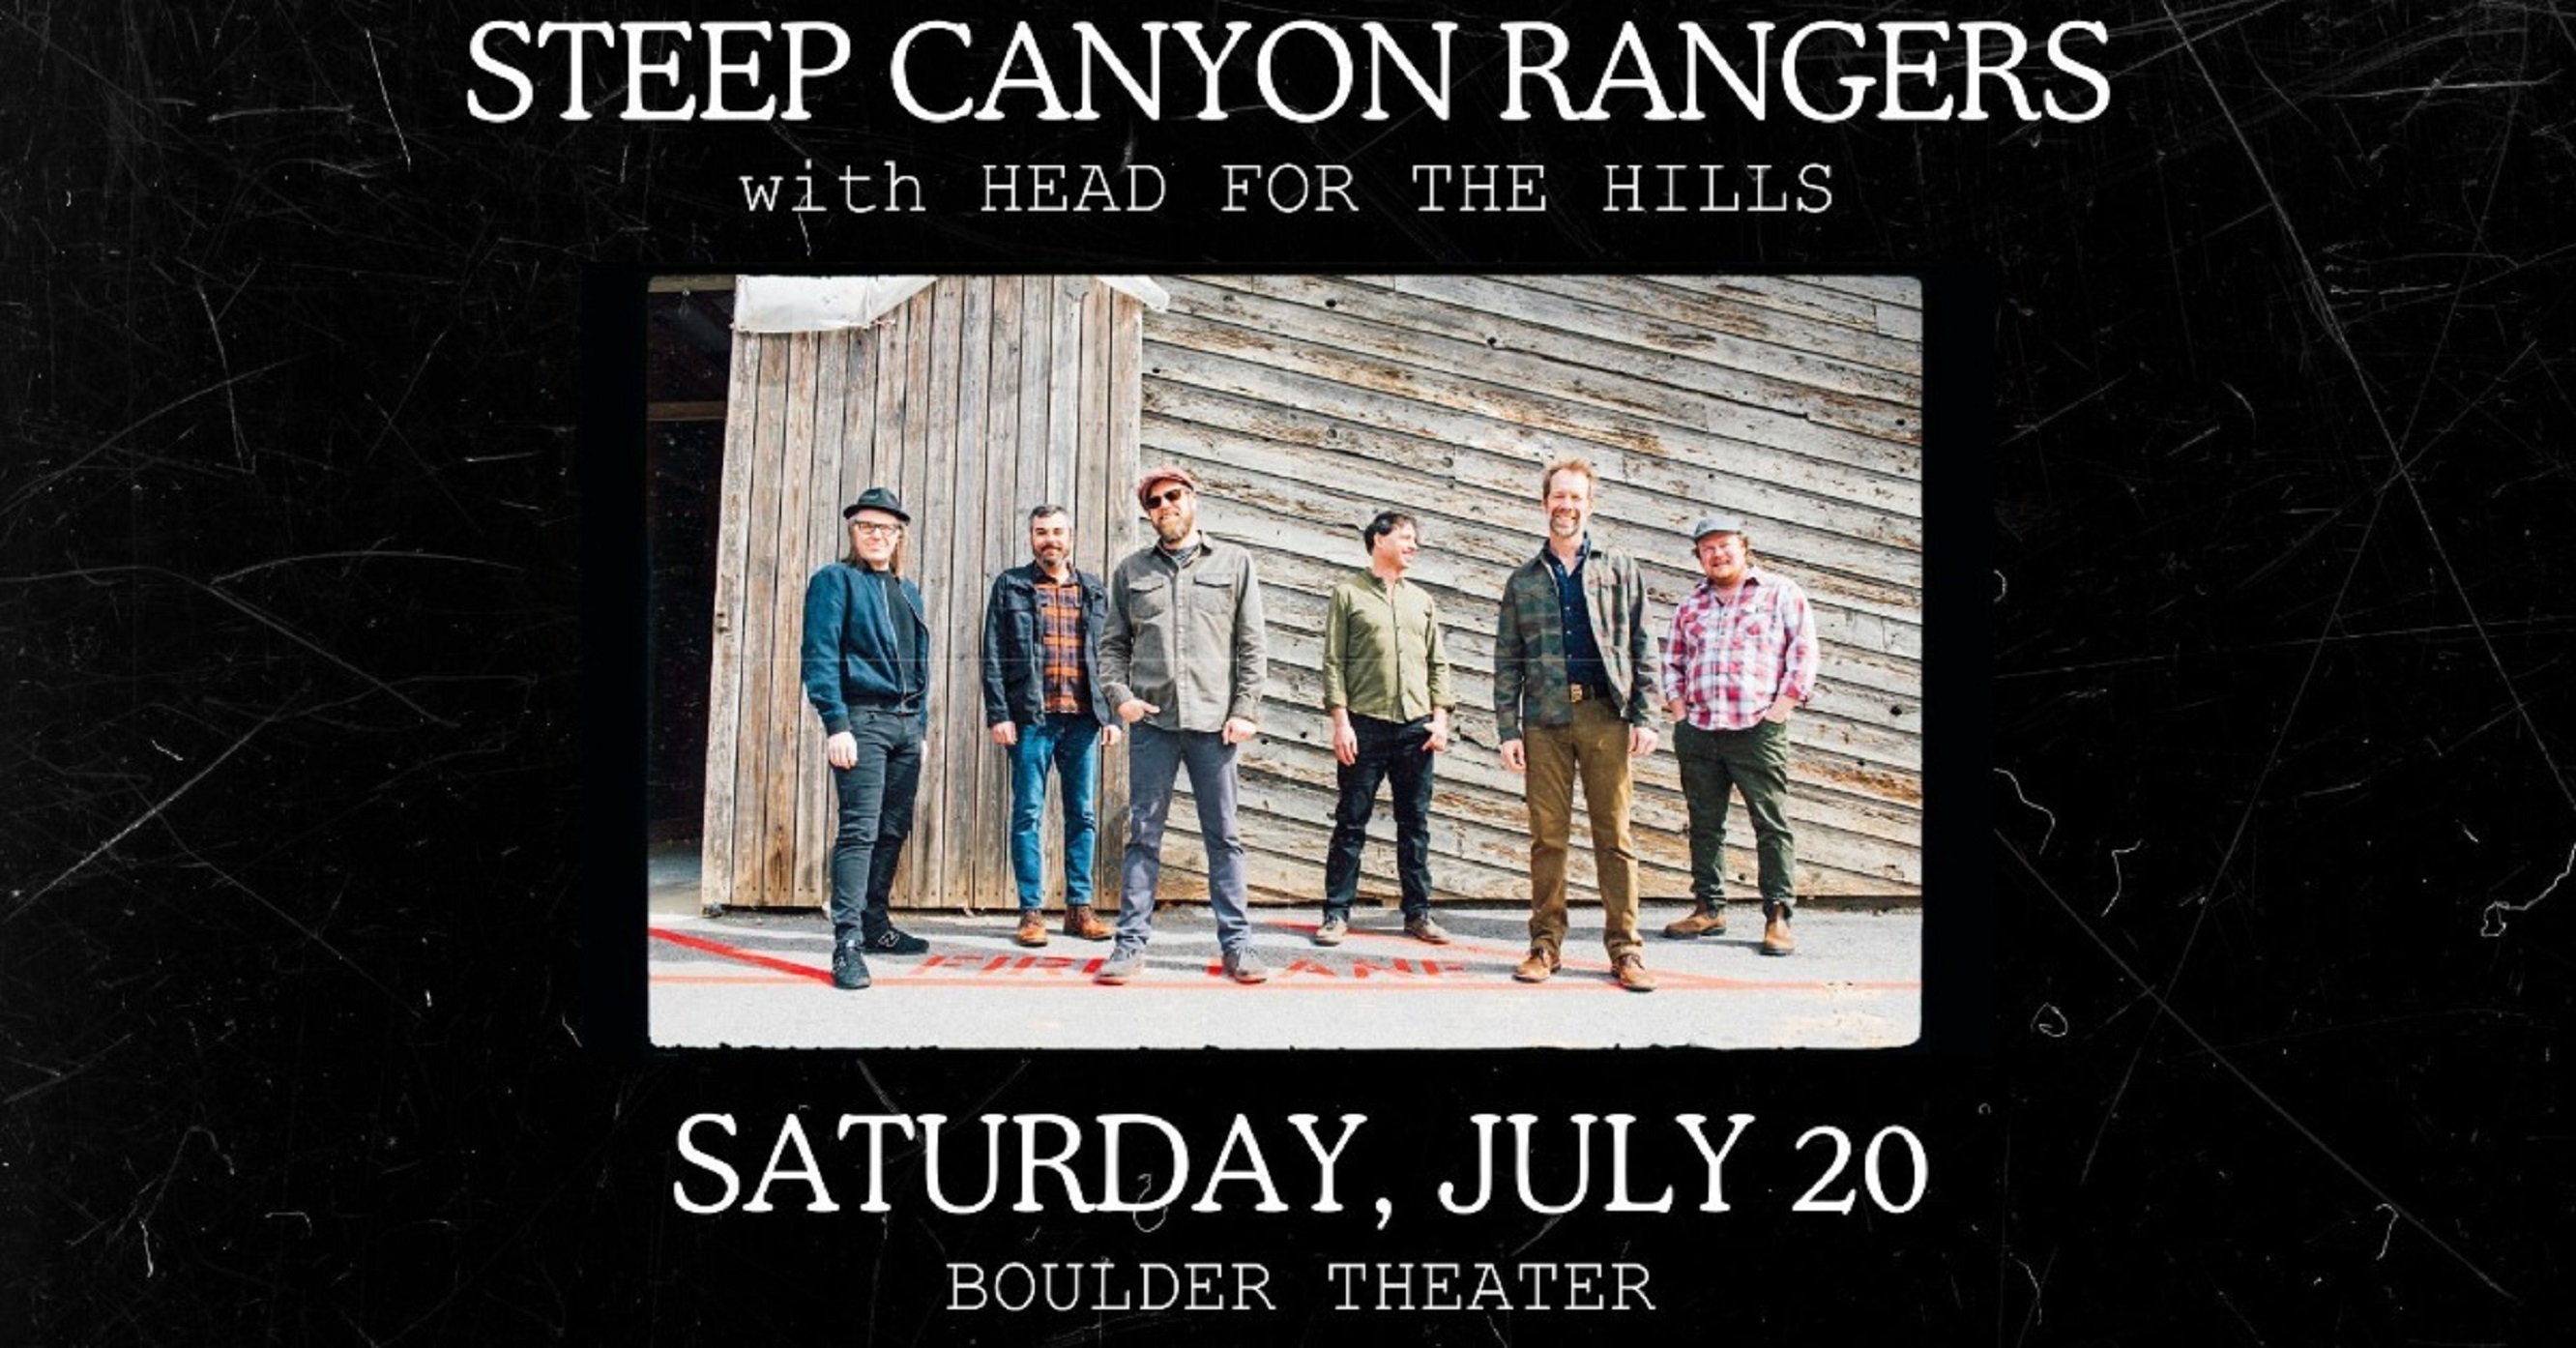 Steep Canyon Rangers to Light Up Boulder Theater with "Morning Shift" Album Showcase